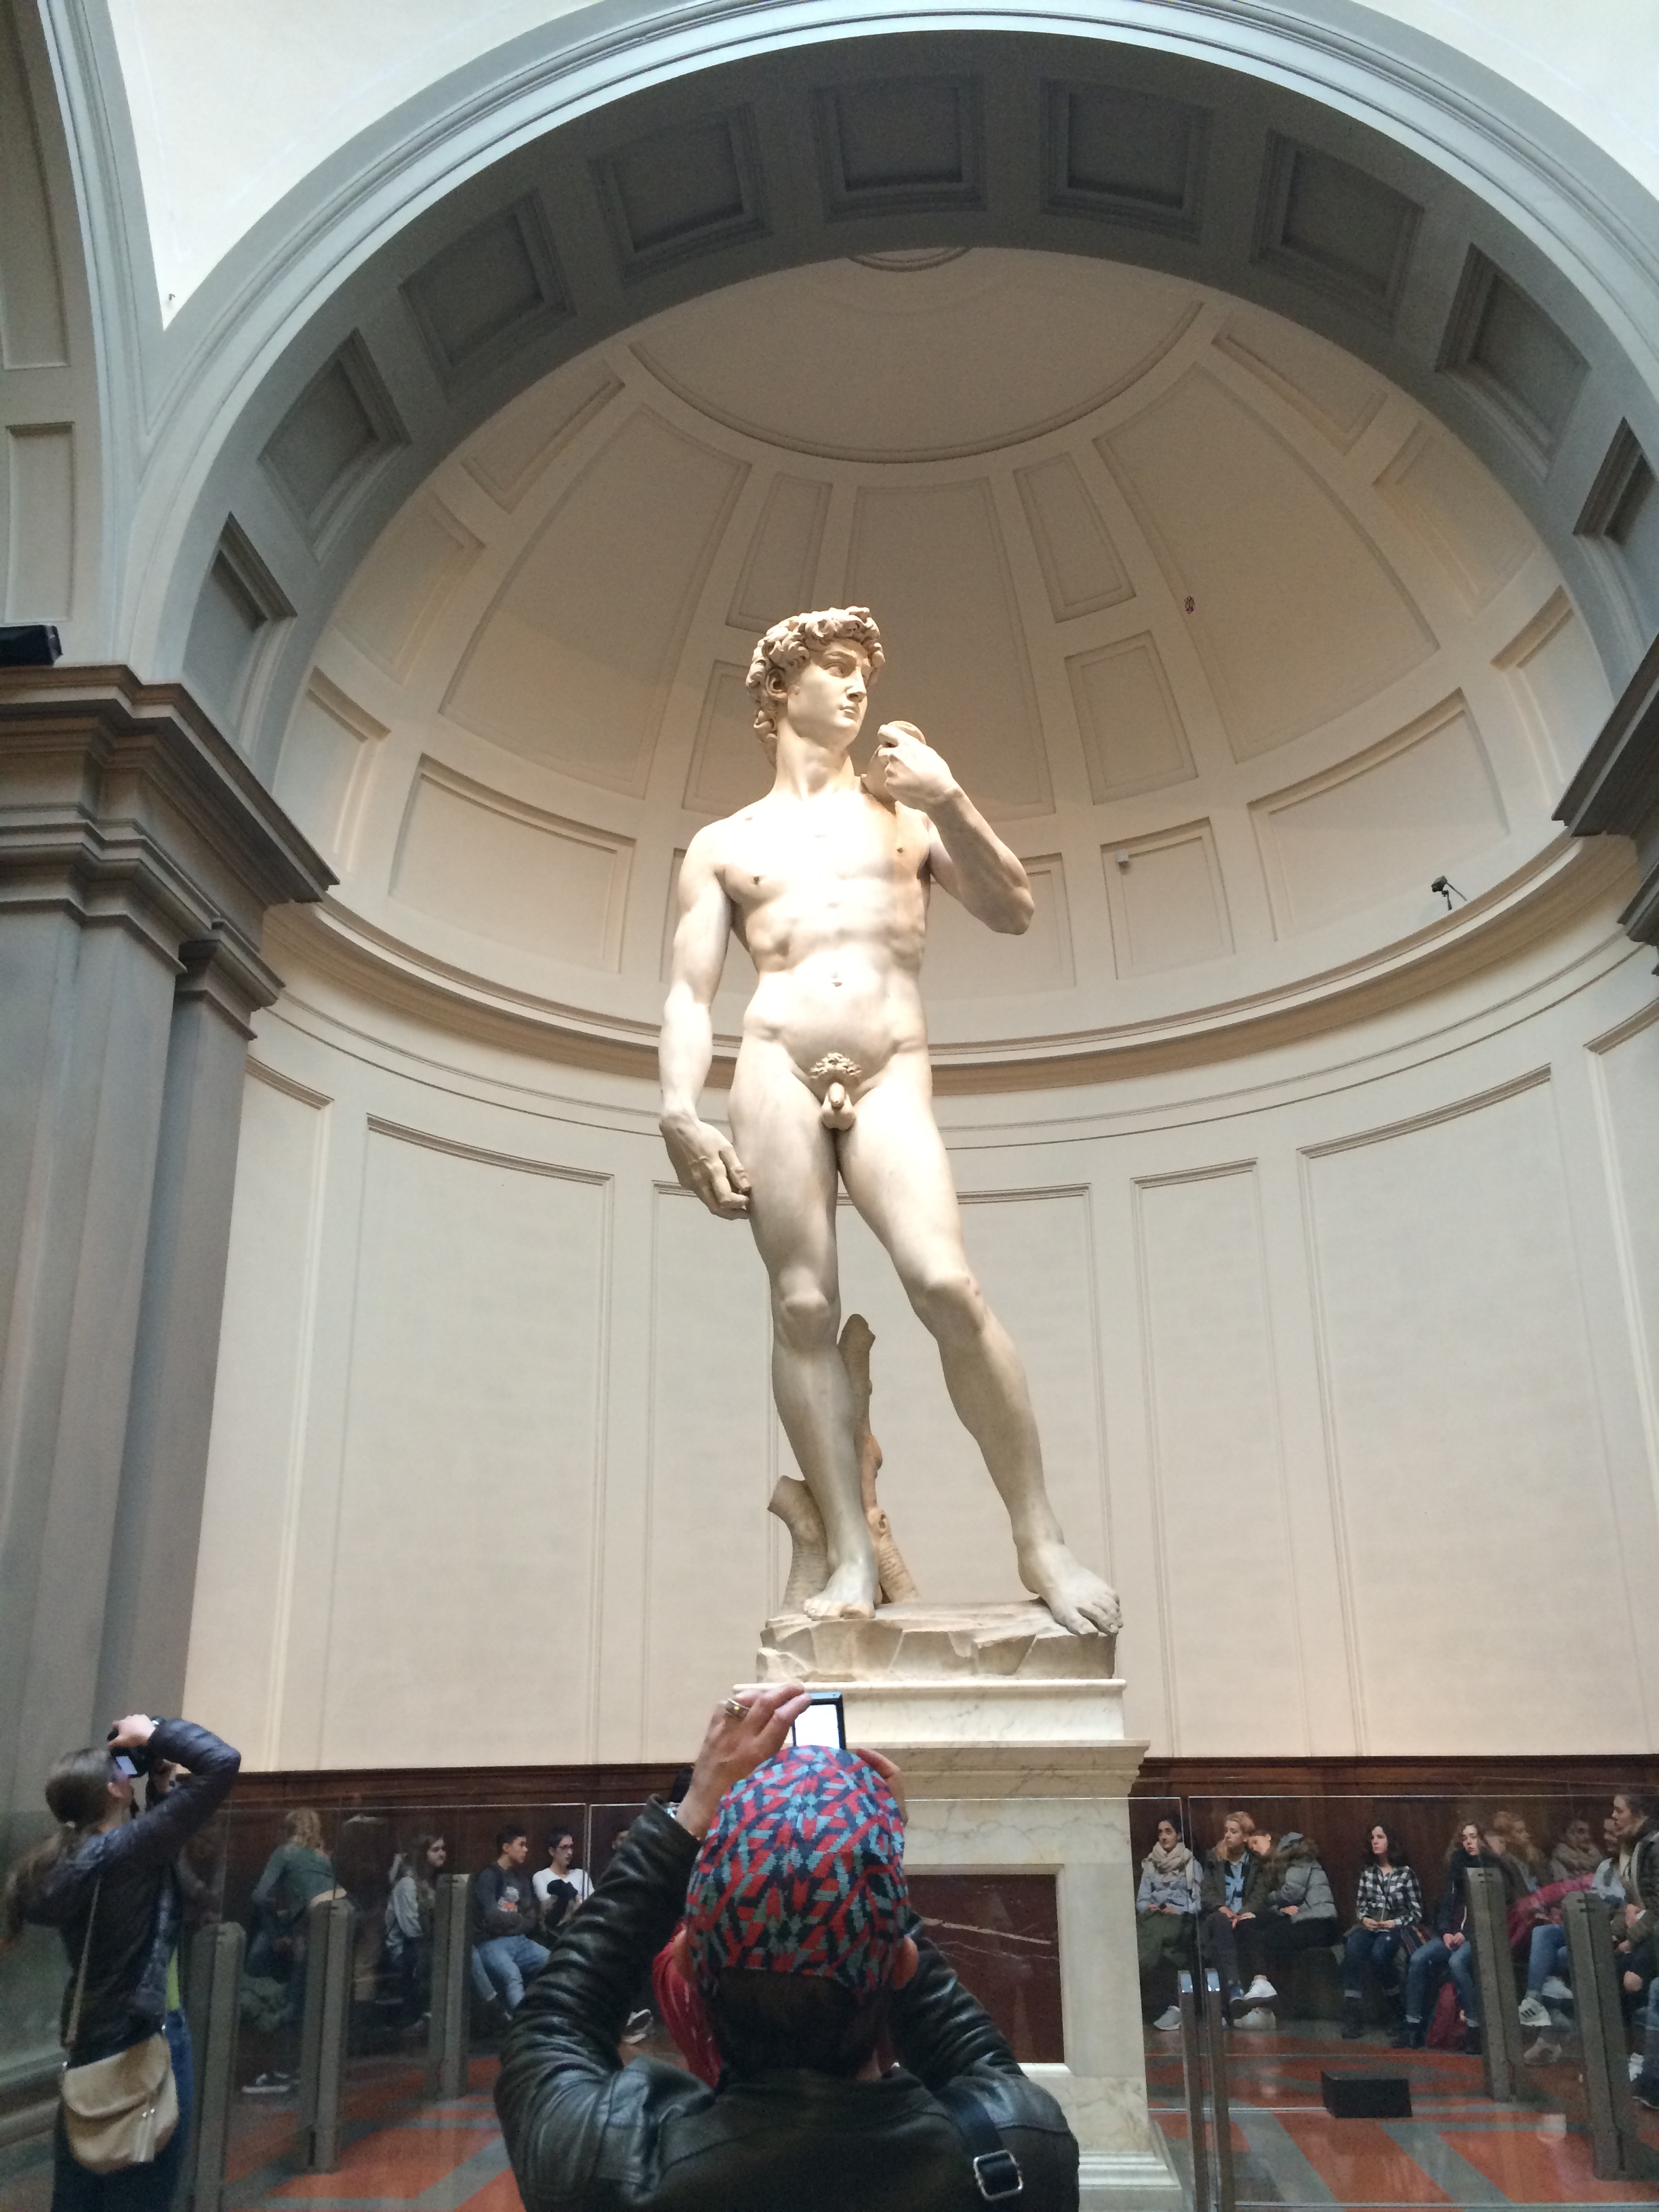 Image of the statue of David